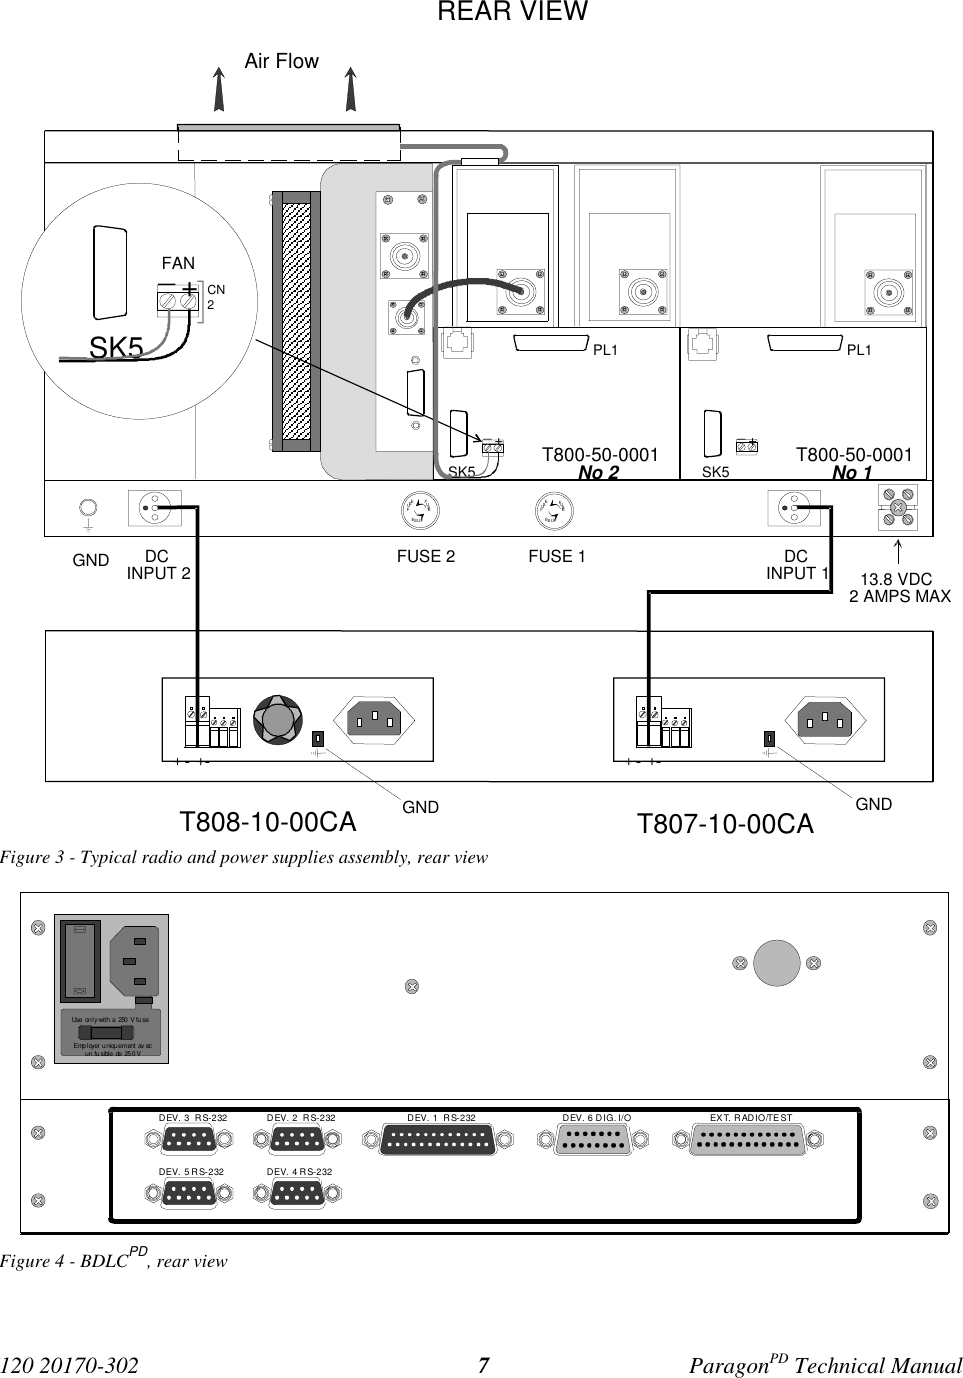 120 20170-302 ParagonPD Technical Manual7Figure 3 - Typical radio and power supplies assembly, rear viewFigure 4 - BDLCPD, rear viewEmployer uniquement avecun  fusible  de  250 VUse  on l y wit h  a  250   V f u seDEV. 3  RS-2 32DEV. 5  RS-232DEV. 2  RS-232DEV. 4  RS-232DEV. 1  RS-232 DEV. 6 DIG. I/O EXT. RADIO/TESTT808-10-00CA T807-10-00CAREAR VIEWAir FlowGNDDCINPUT 1FUSE 1FUSE 2DCINPUT 2 13.8 VDC2 AMPS MAXFUSEFUSEFUSEFUSEFUSEFUSE+-+-+-+-GNDGNDT800-50-0001No 1PL1SK5T800-50-0001No 2PL1SK5_+_+SK5_+FANCN2